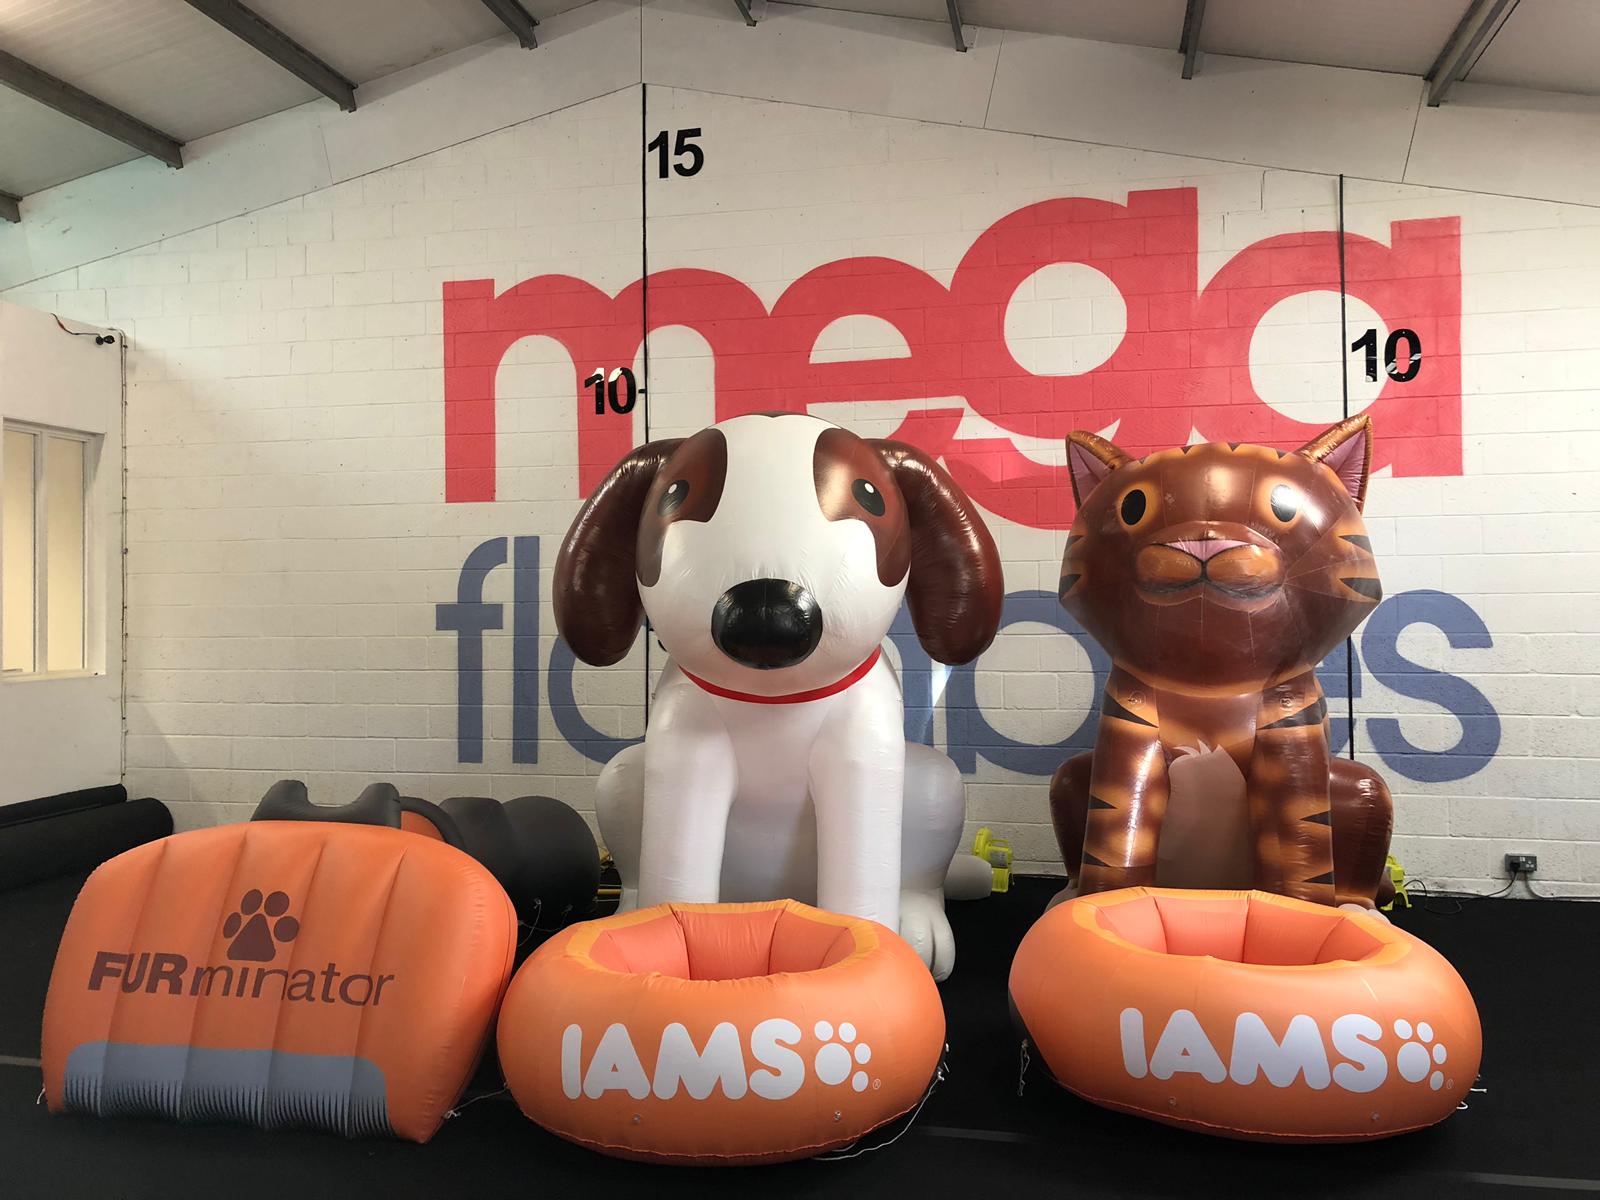 Iams Inflatable Cat and Dog